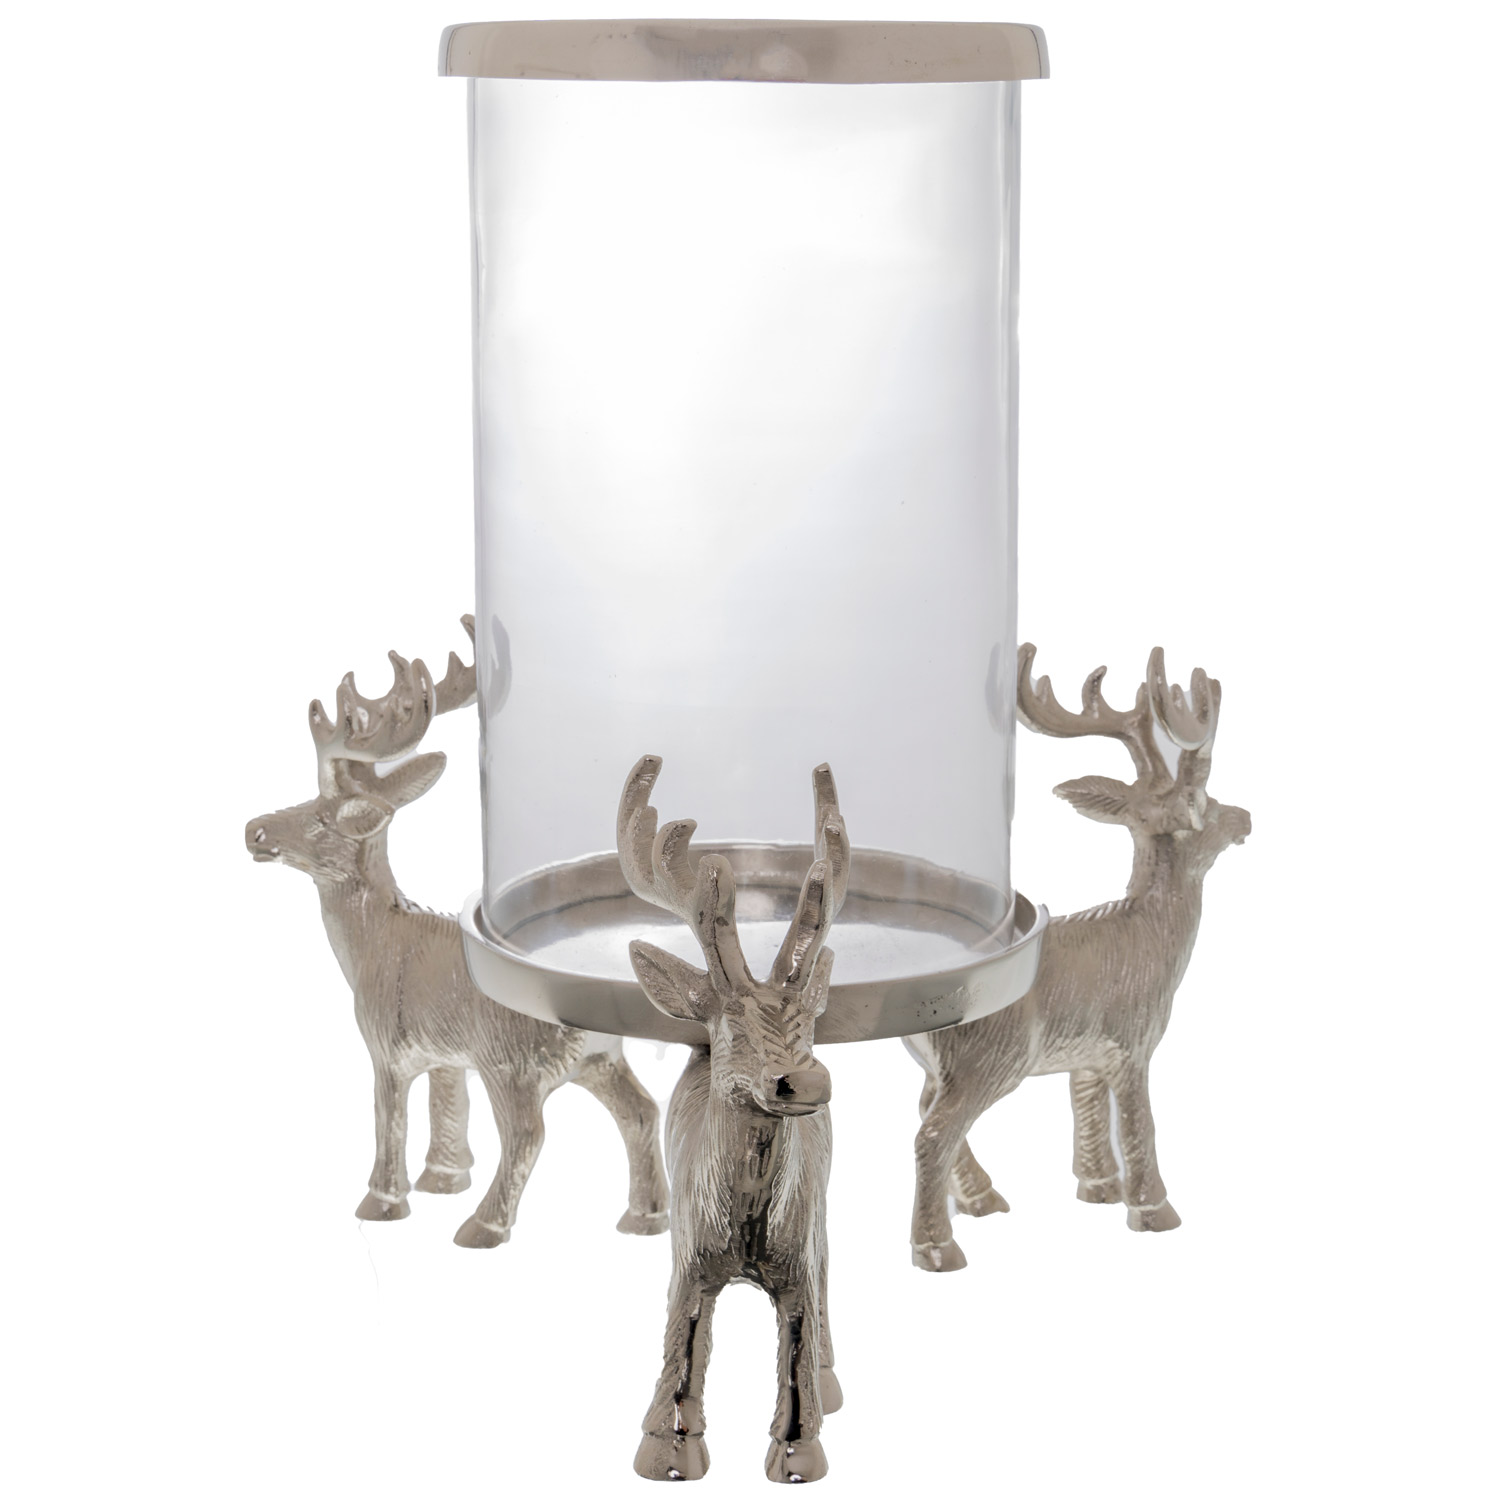 Circle Of Stags Candle Hurrican Lantern - Image 1